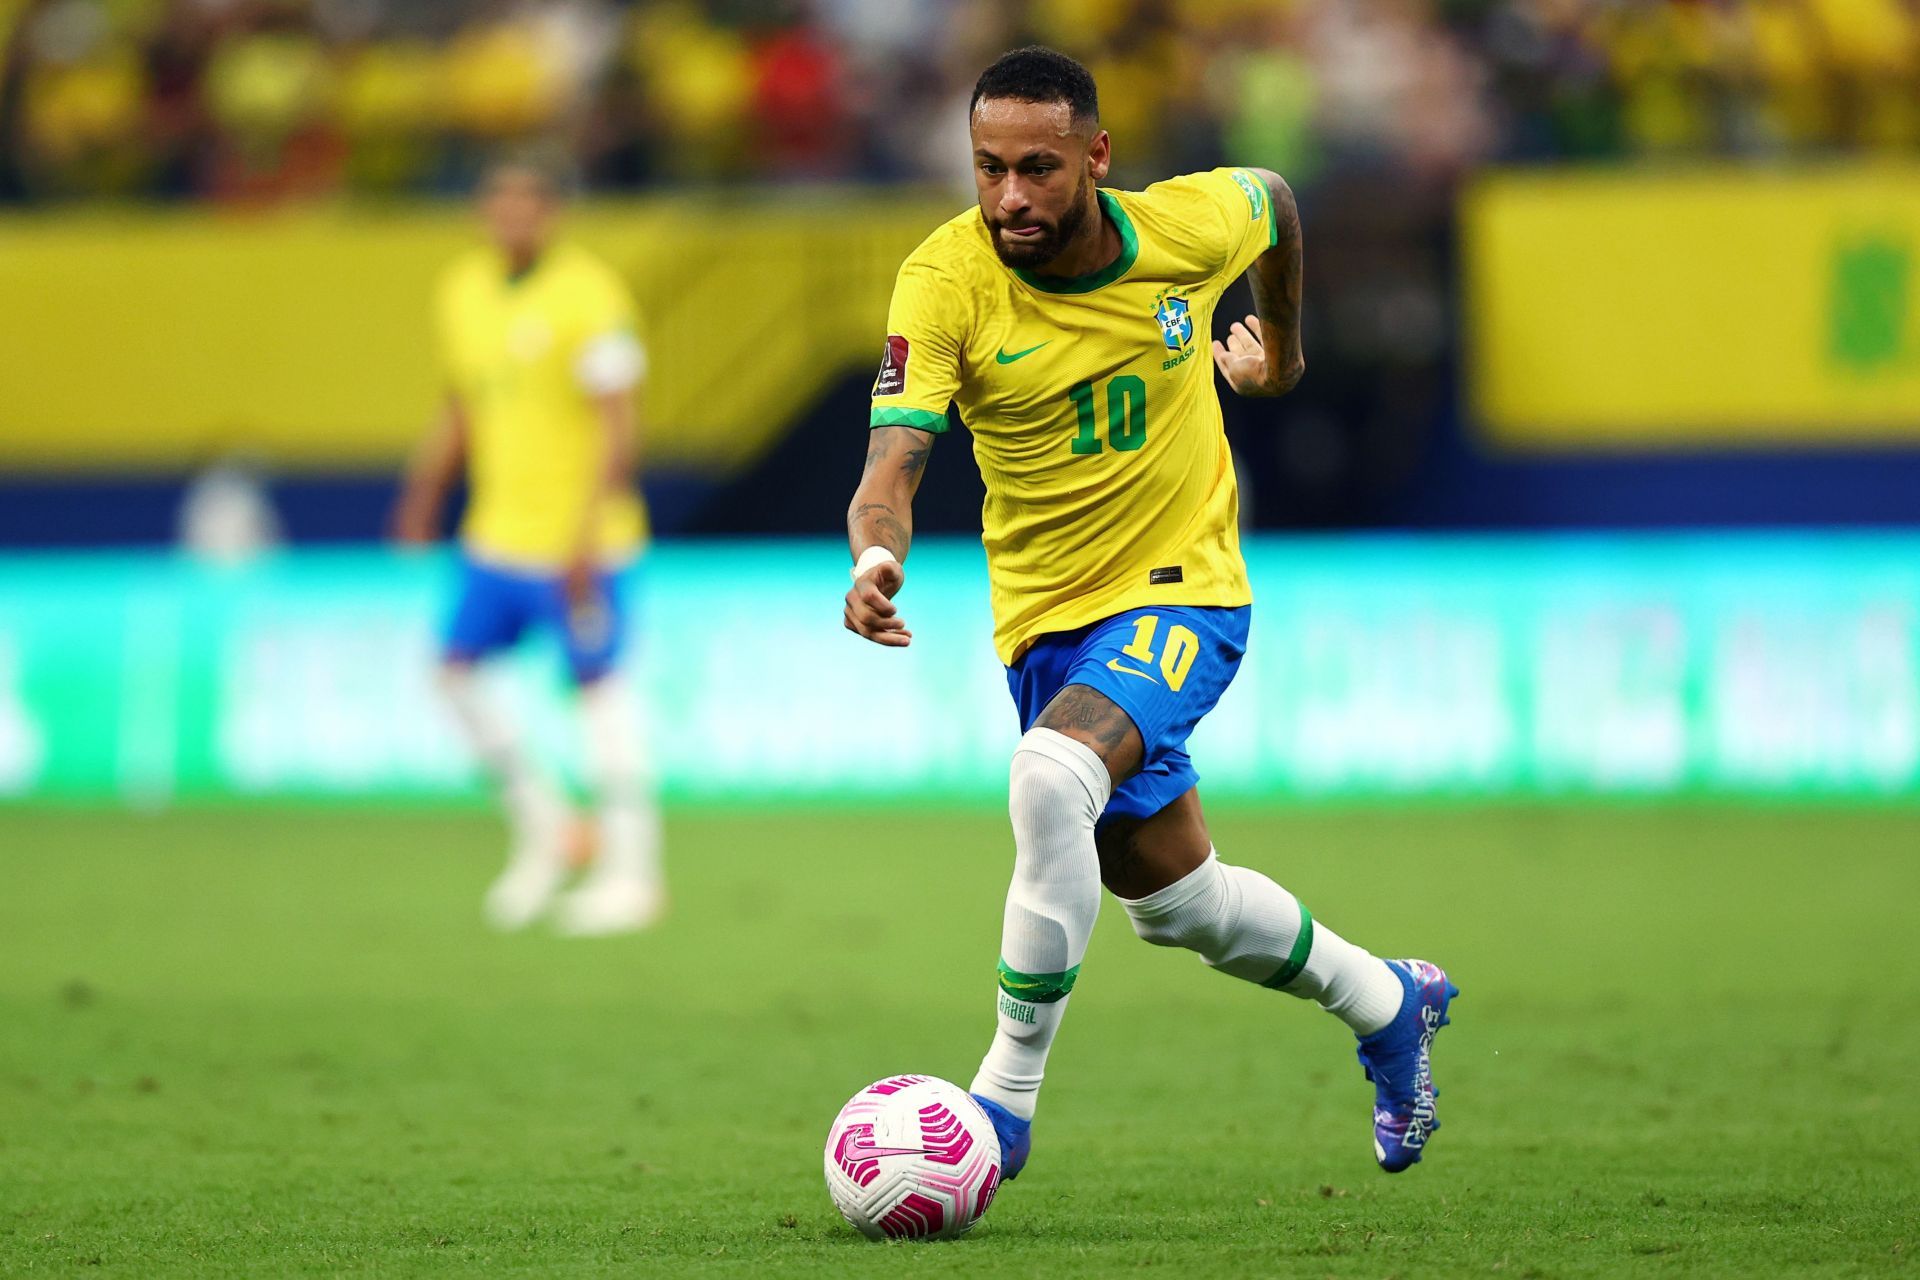 Neymar continues shining with Brazil.